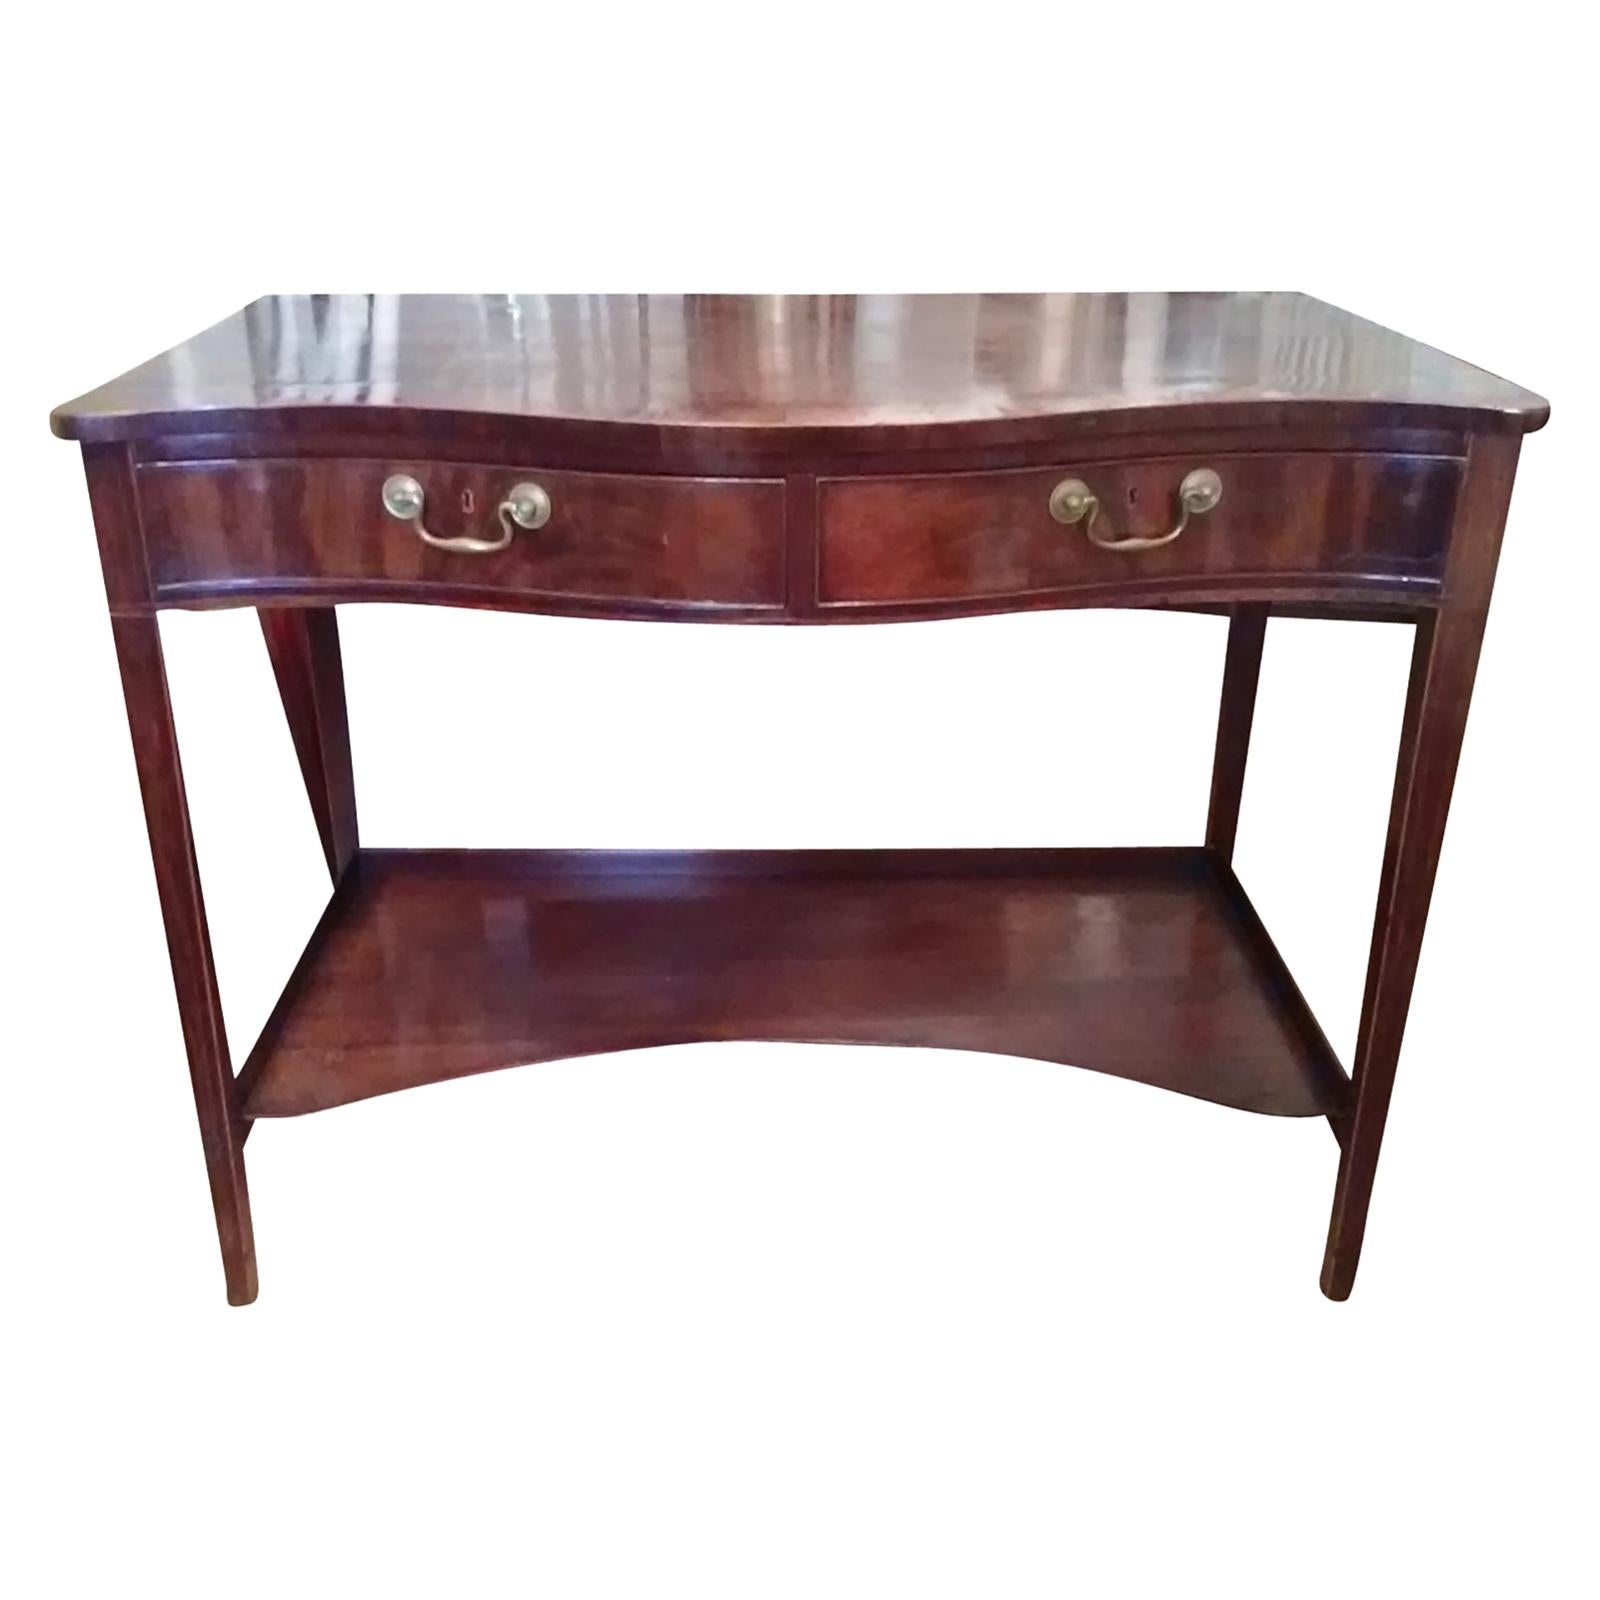 19th Century English Georgian Style Mahogany Server with Two Drawers